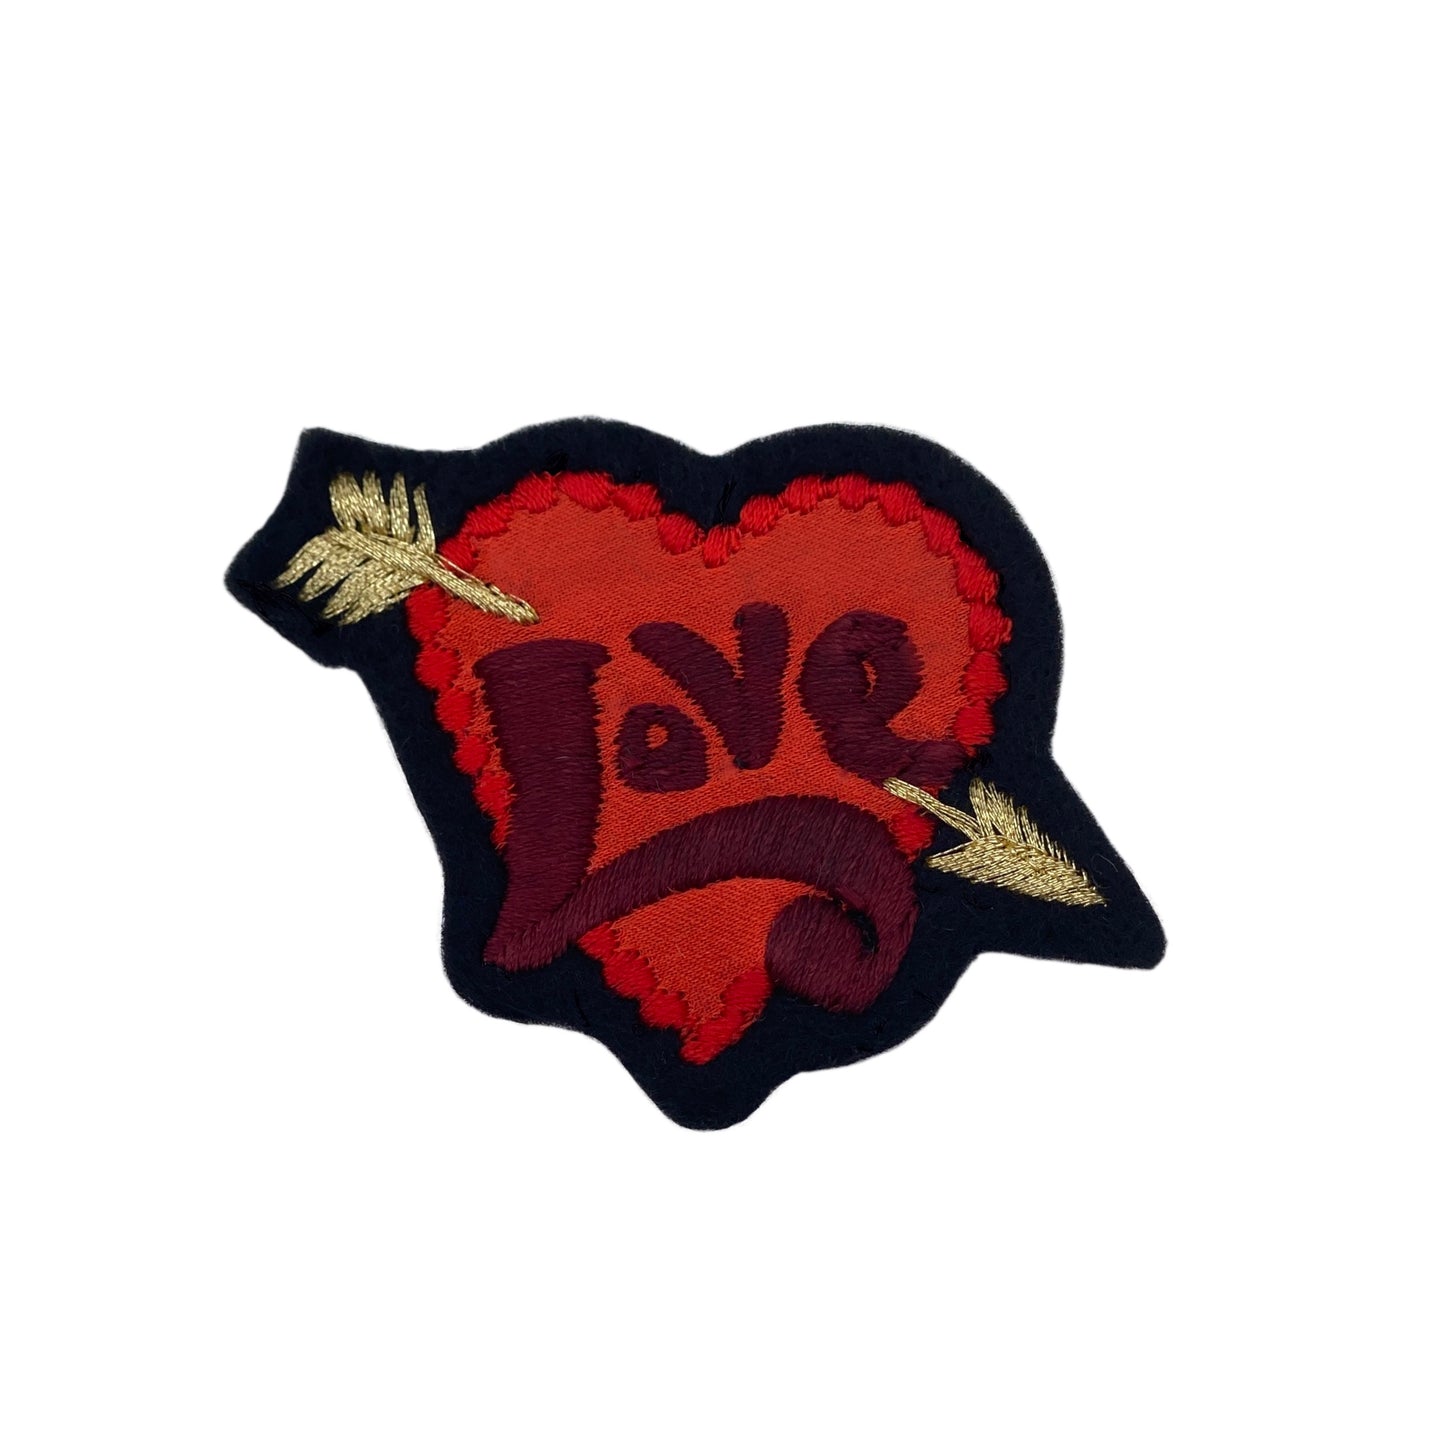 Tiny love embroidered patch on white background